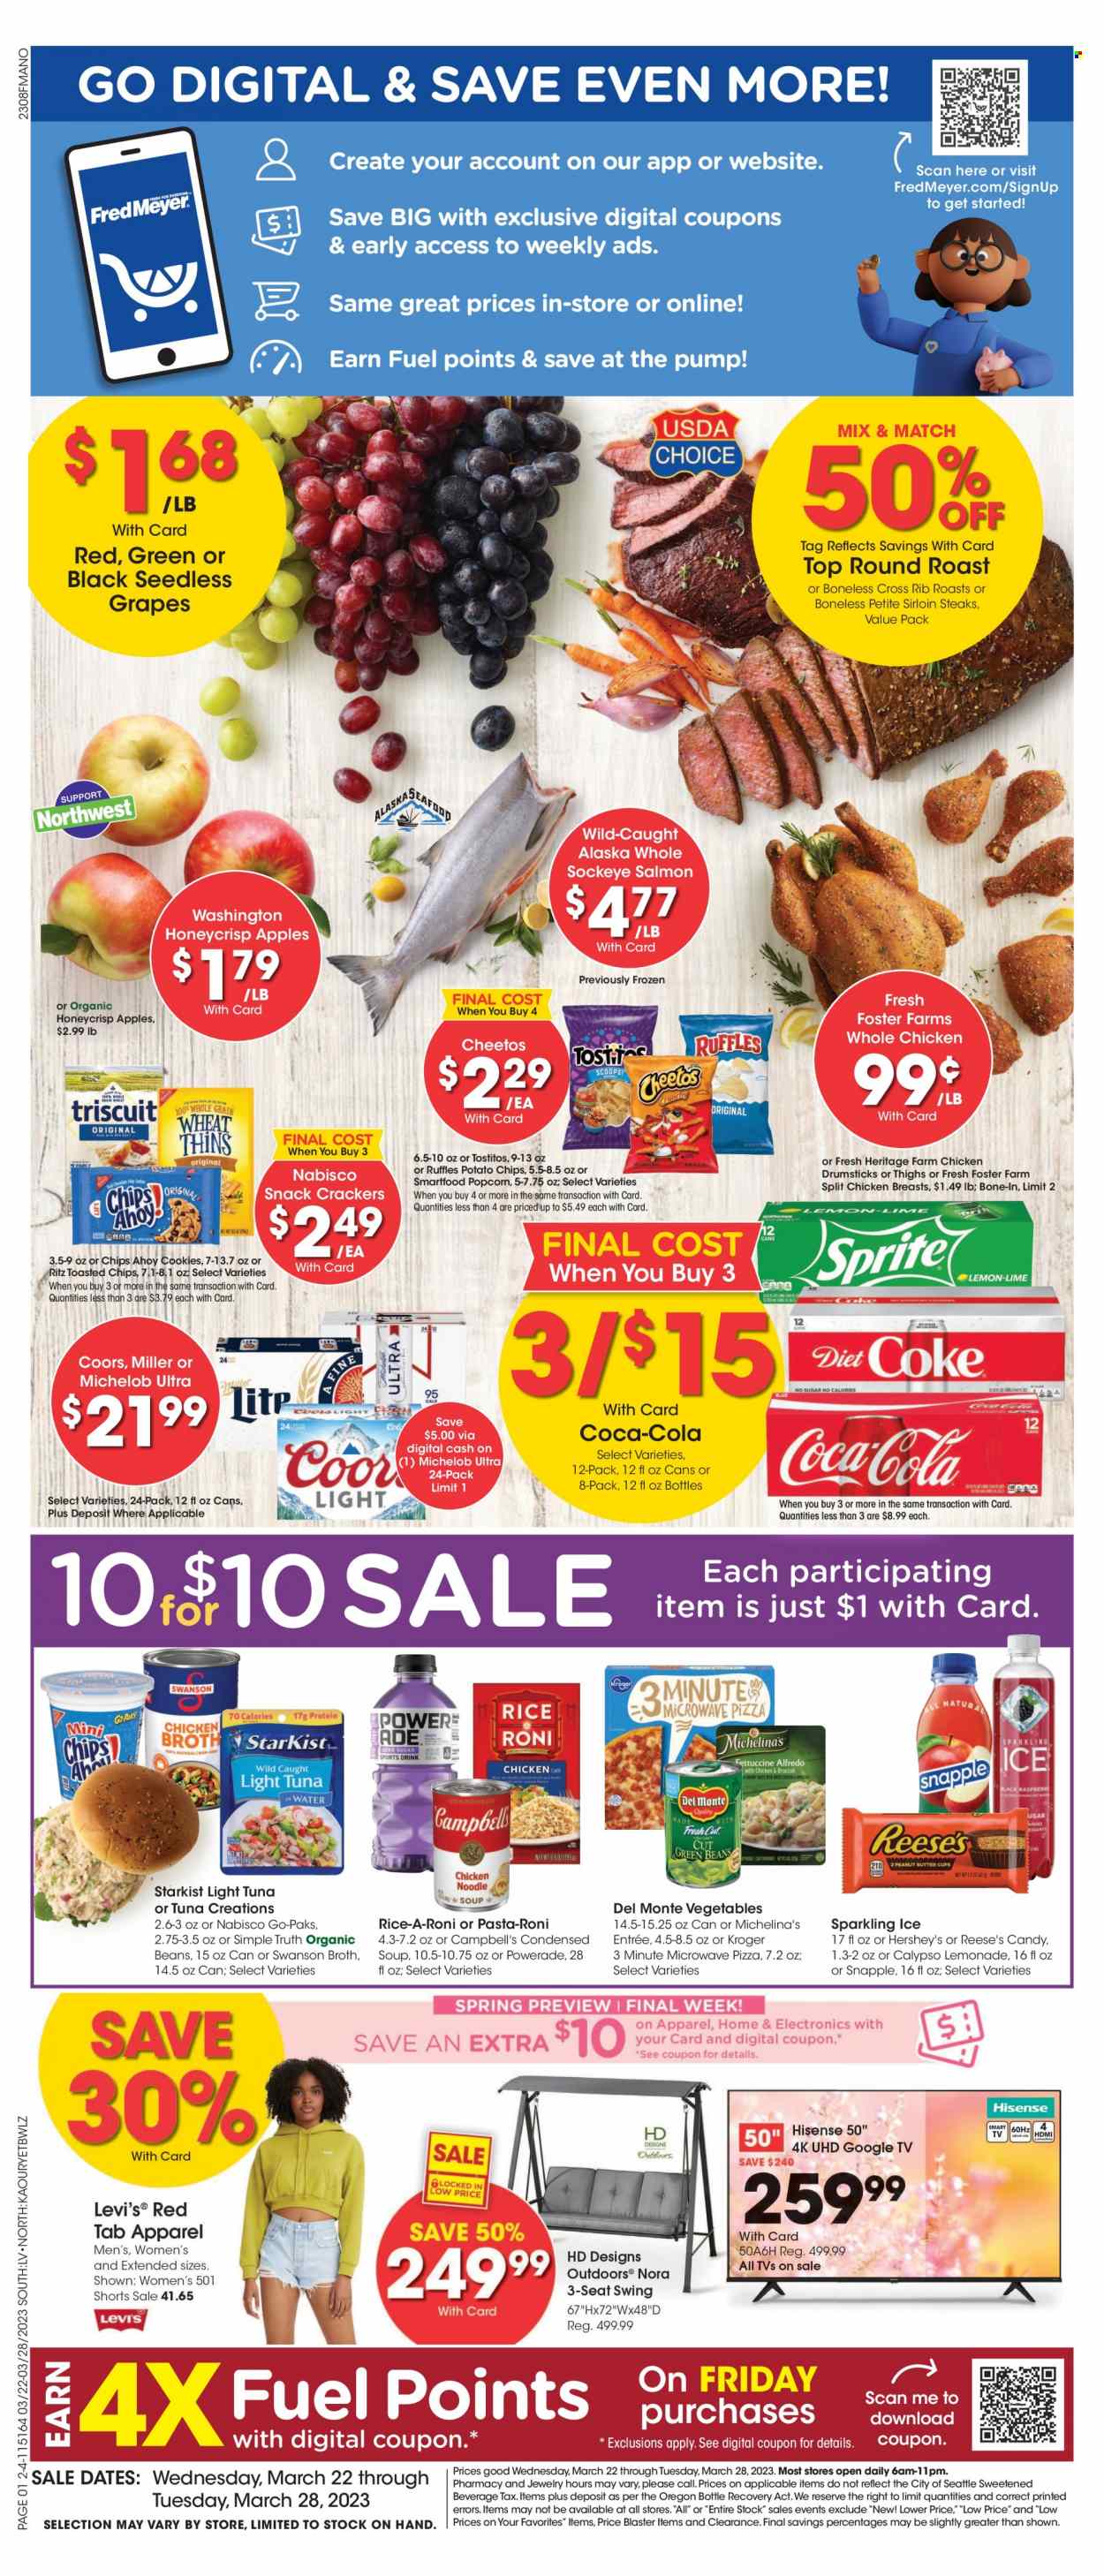 thumbnail - Fred Meyer Flyer - 03/22/2023 - 03/28/2023 - Sales products - apples, grapes, seedless grapes, salmon, tuna, StarKist, Campbell's, pizza, condensed soup, soup, noodles cup, noodles, instant soup, roast, Reese's, Hershey's, cookies, snack, crackers, RITZ, potato chips, Cheetos, Smartfood, Thins, Ruffles, Tostitos, chicken broth, broth, light tuna, Del Monte, rice, Coca-Cola, lemonade, Sprite, Powerade, Diet Coke, Snapple, Coke, water, beer, Miller, whole chicken, chicken breasts, chicken drumsticks, chicken, beef meat, steak, round roast, sirloin steak, Hisense, TV, Levi's, shorts, jewelry, swing set, Coors, Michelob. Page 1.